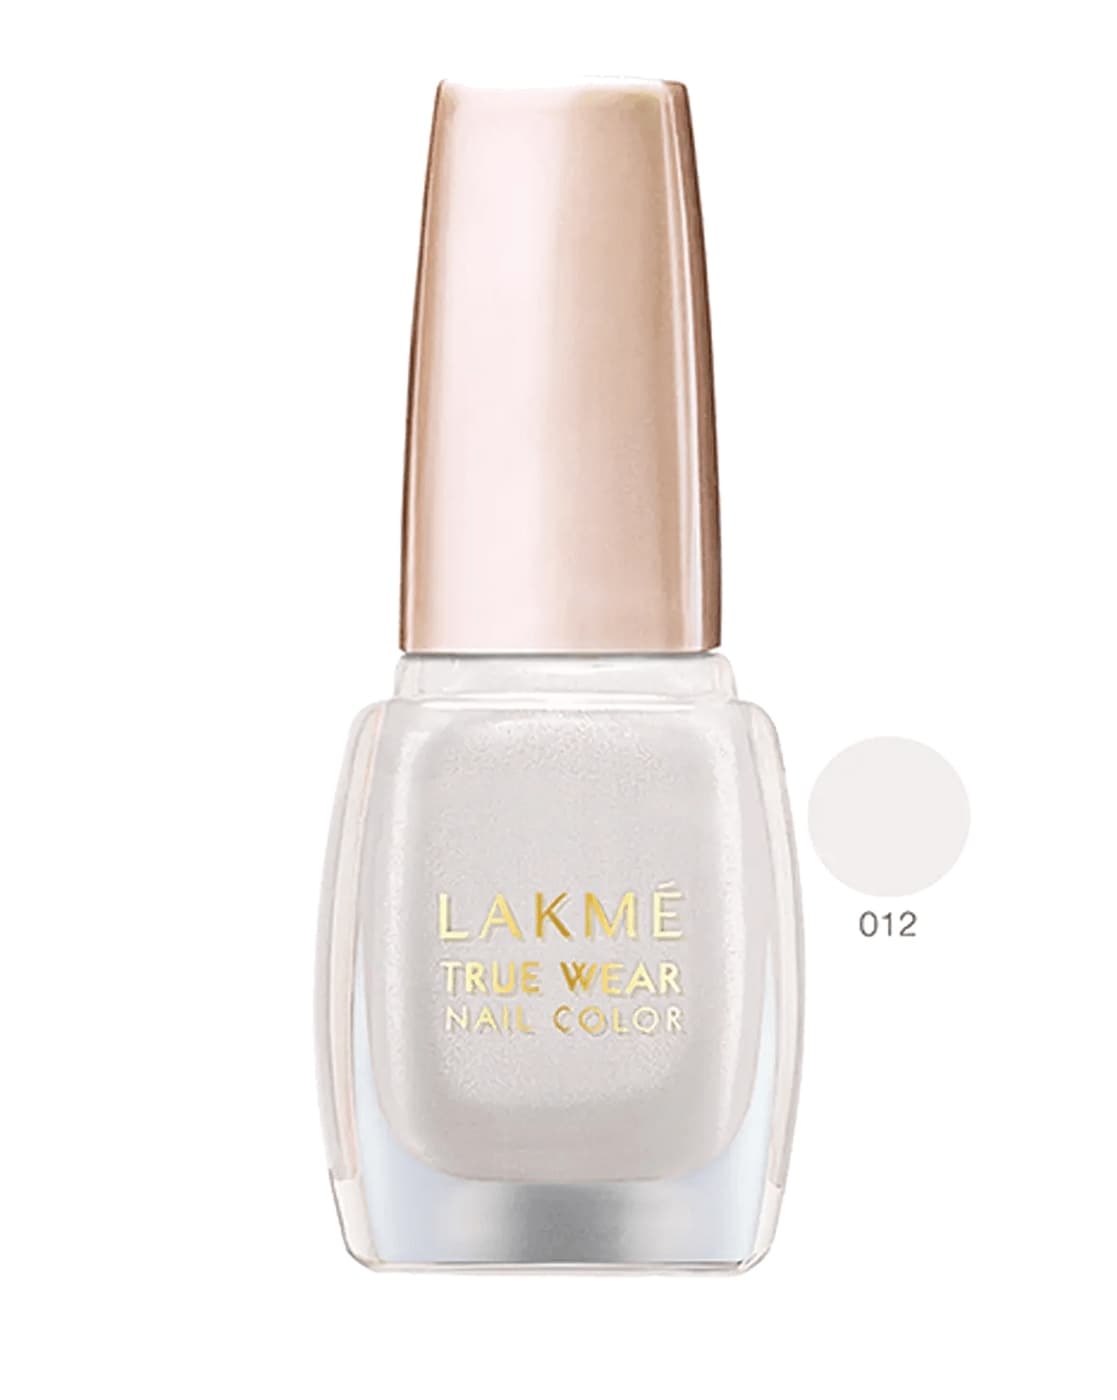 Lakme True Wear Nail Color 25 price in Bahrain, Buy Lakme True Wear Nail  Color 25 in Bahrain.